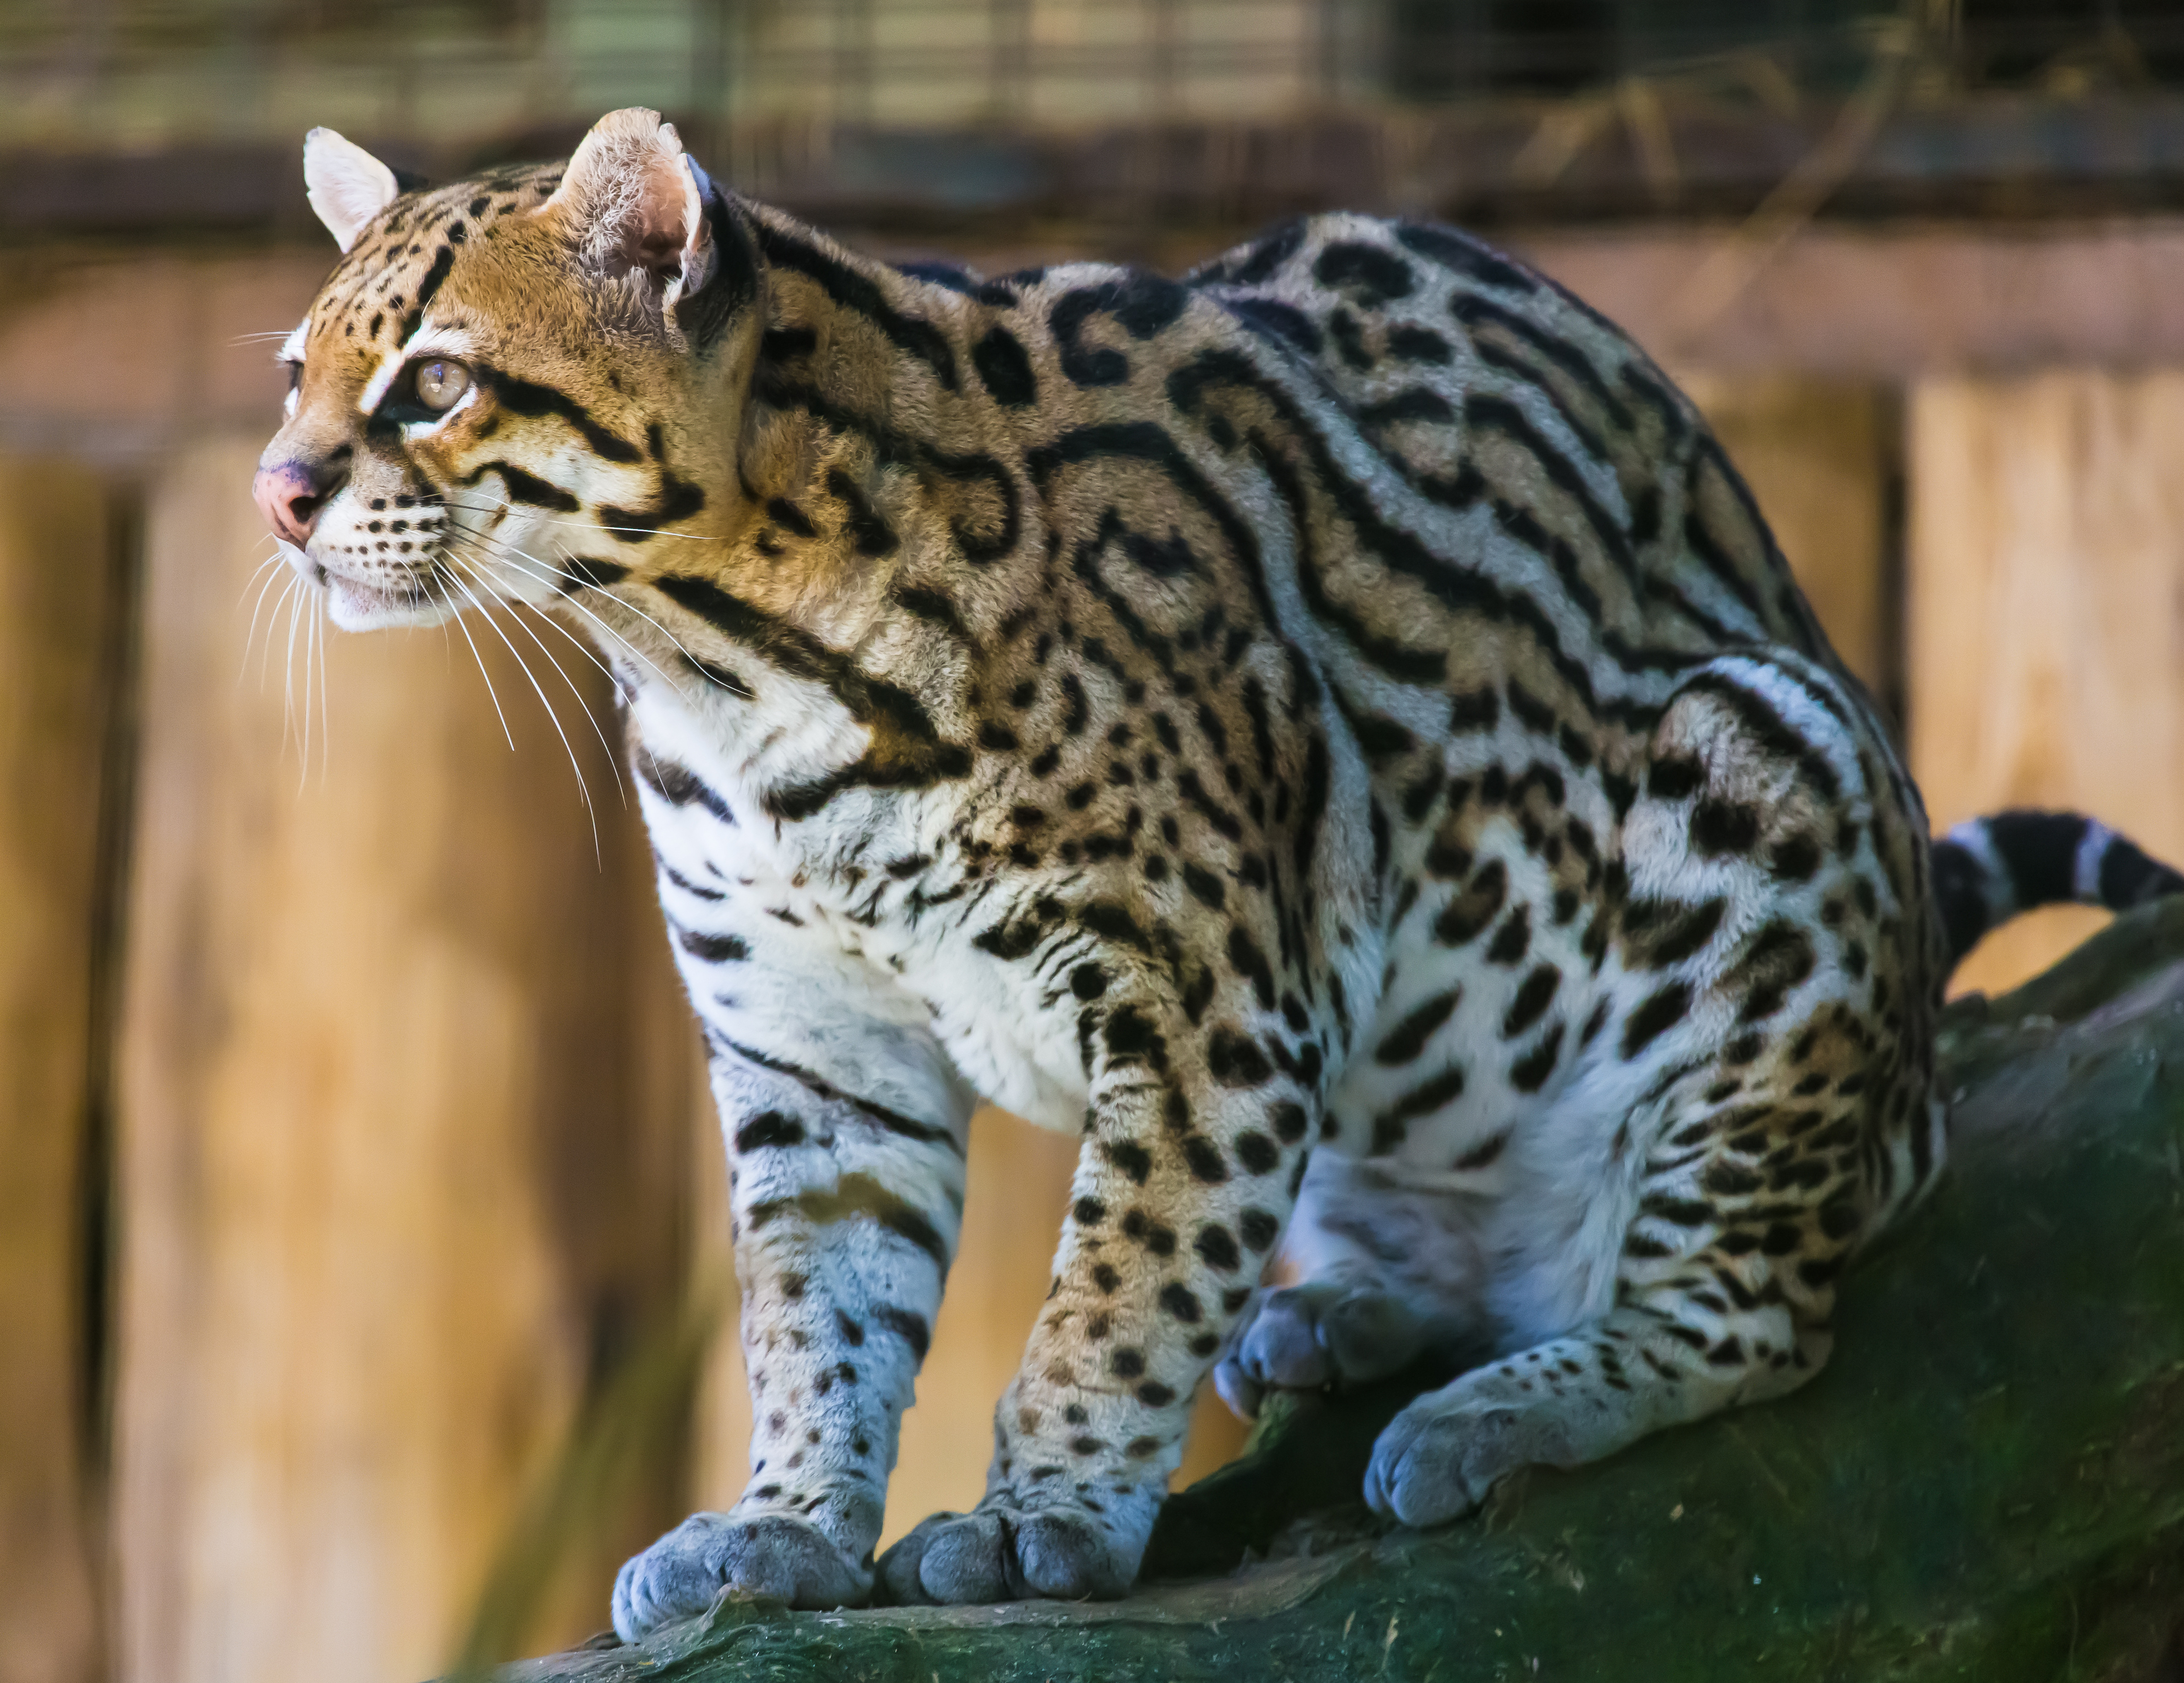 How rare are ocelots in real life?